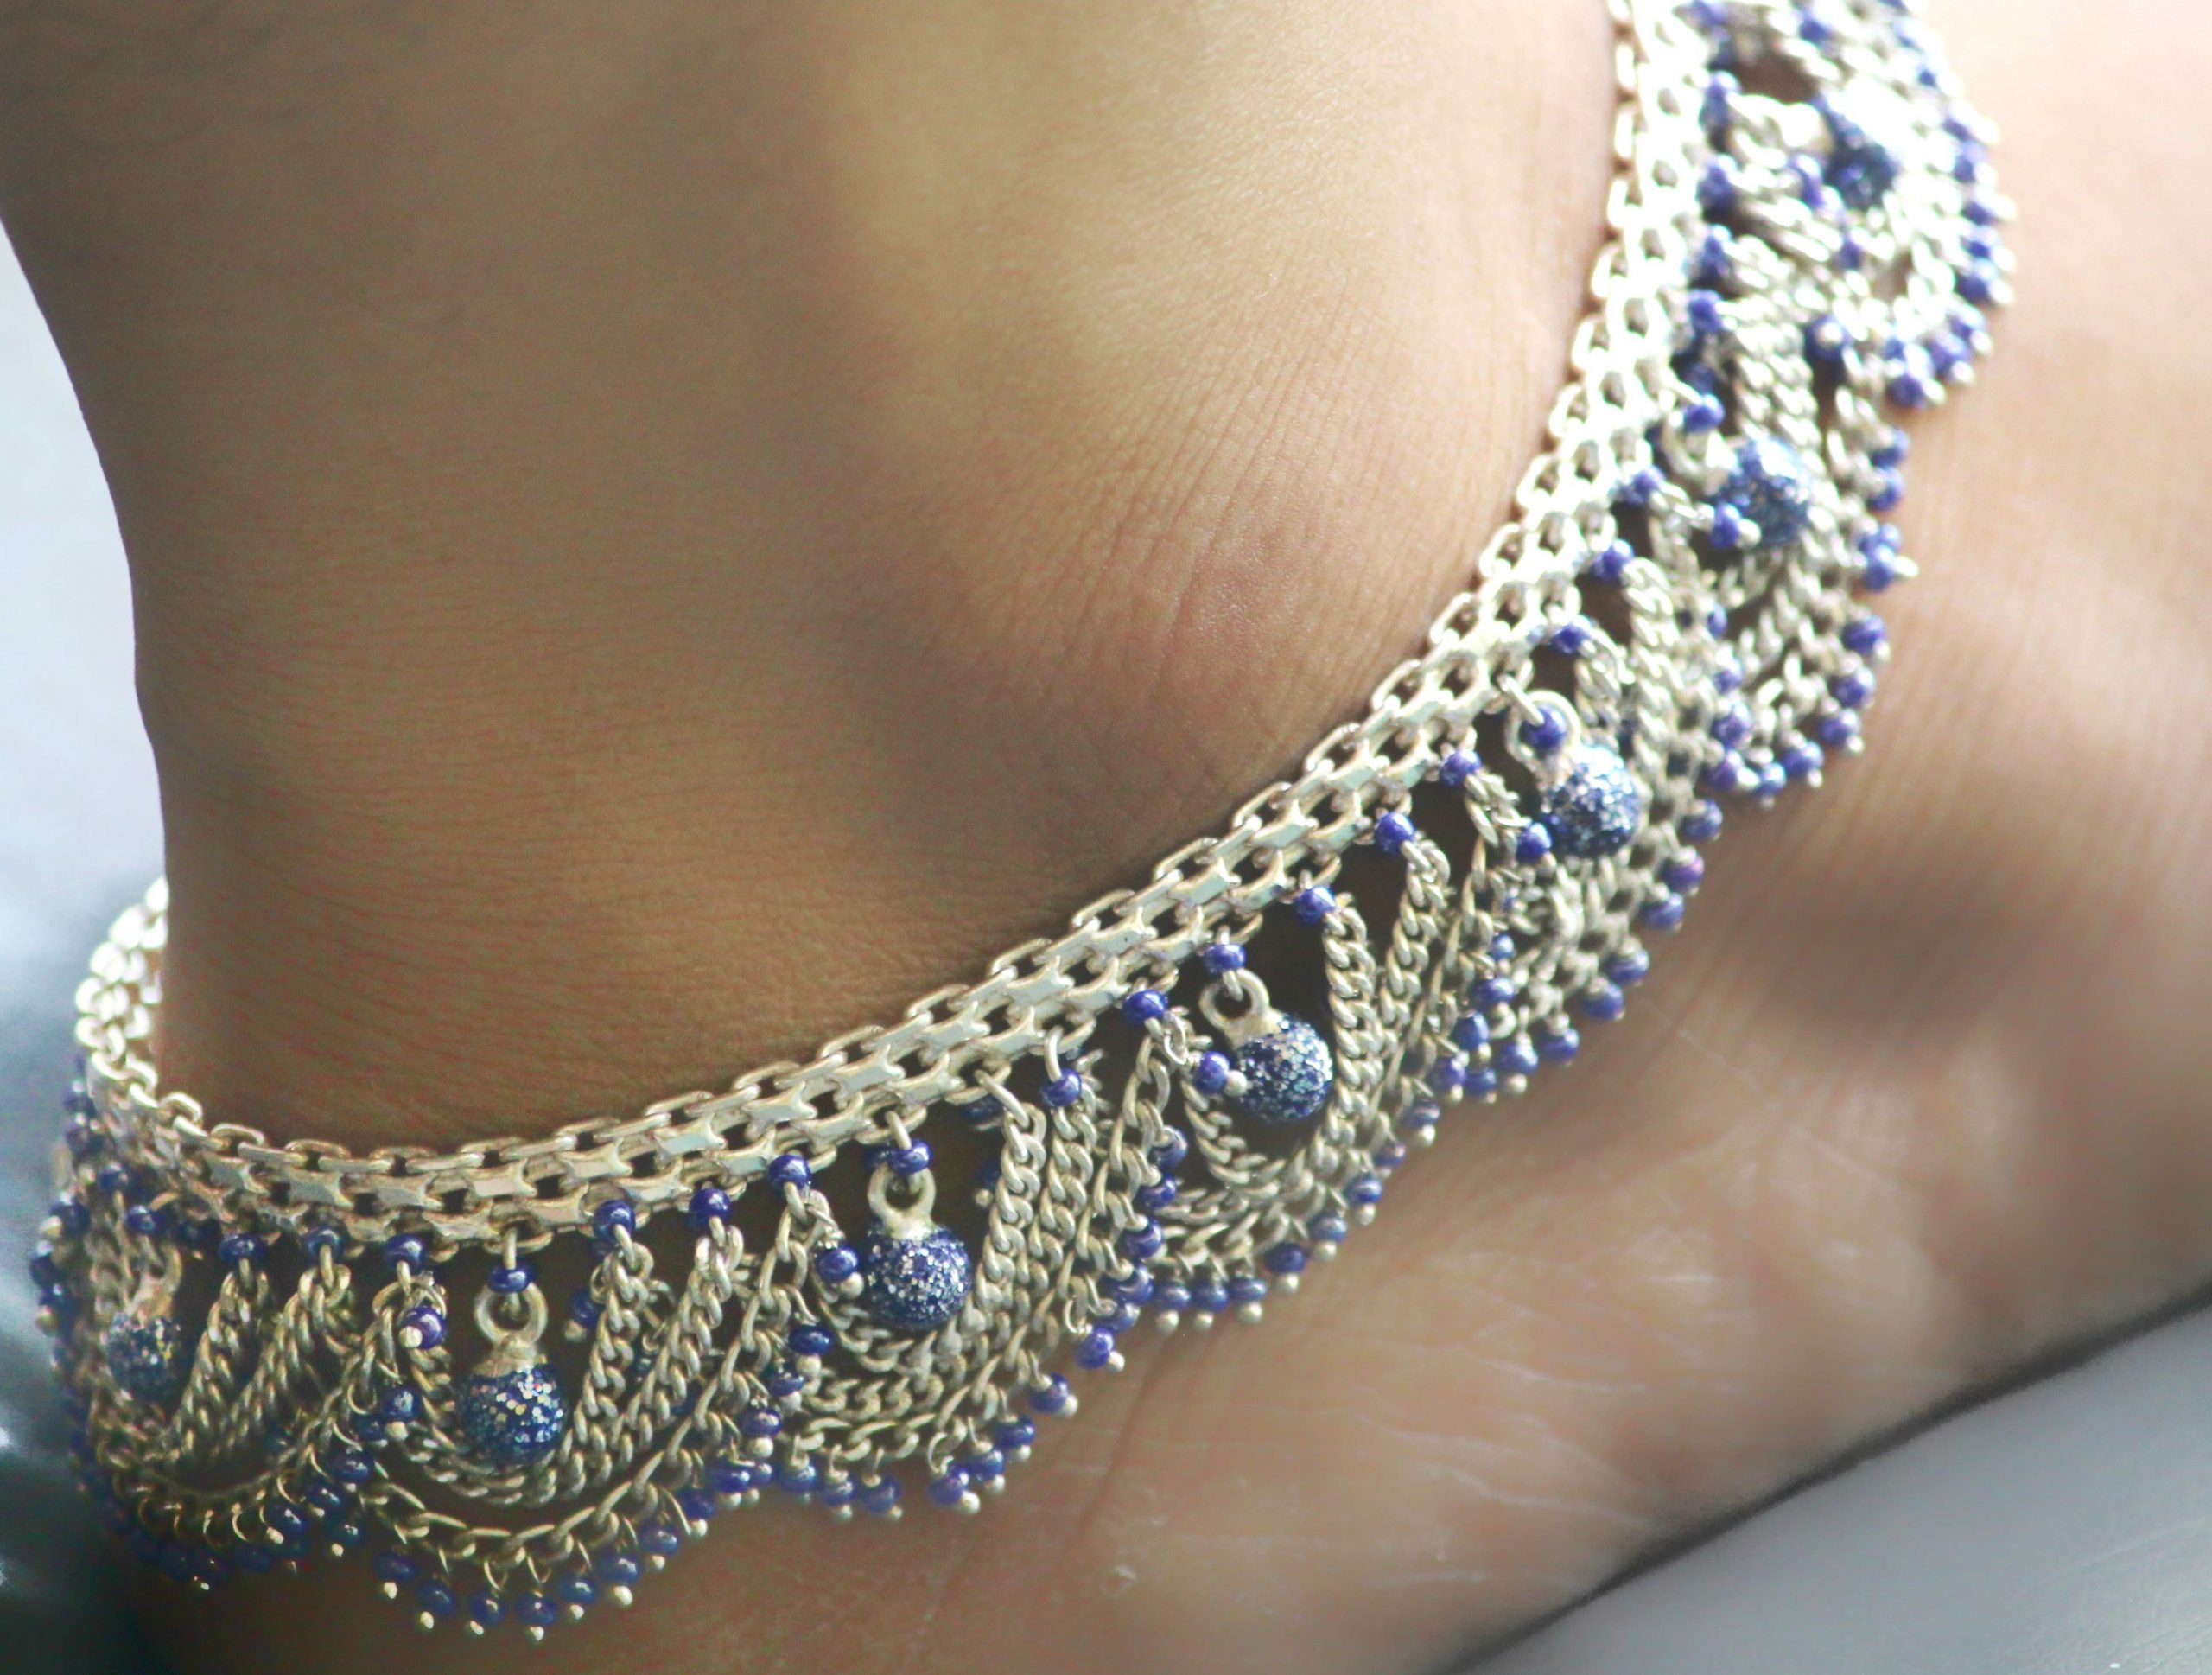 A Lady wearing Anklets